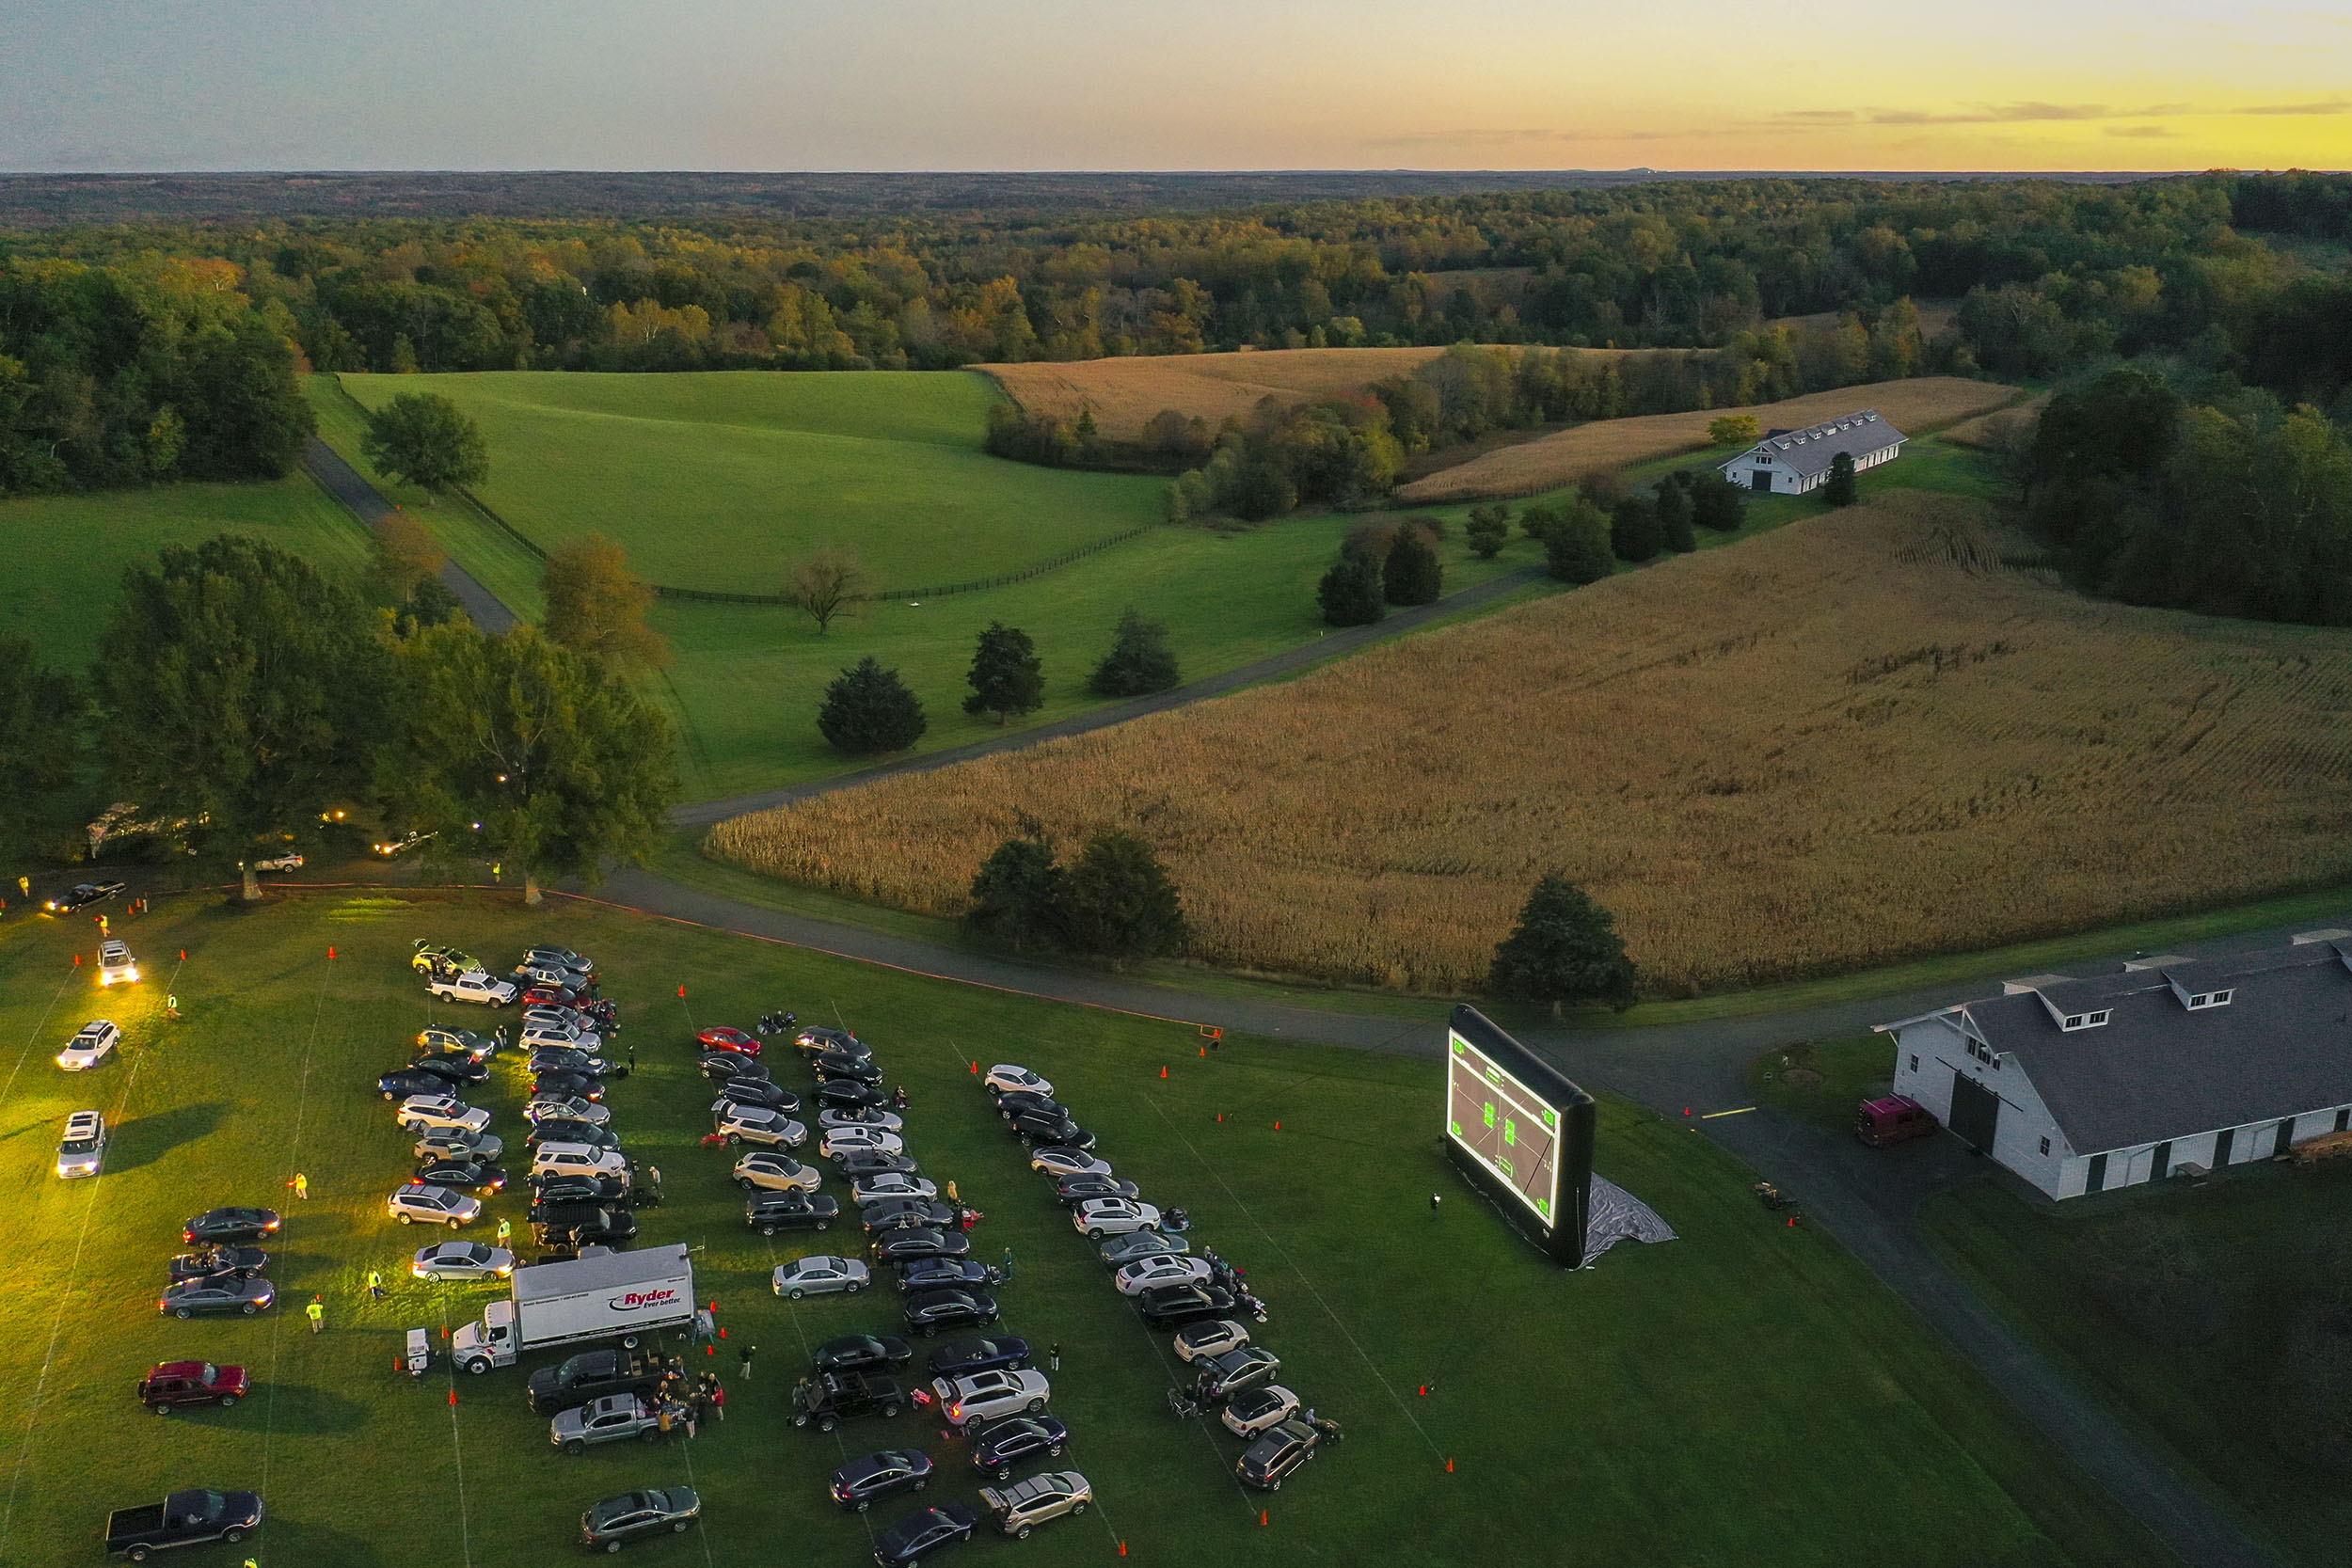 Drive-in movies at Morven Farm, first offered last year during the COVID-19 pandemic, returned to give families the option to watch films from their cars in an idyllic rural setting. (Photo by Jack Looney)